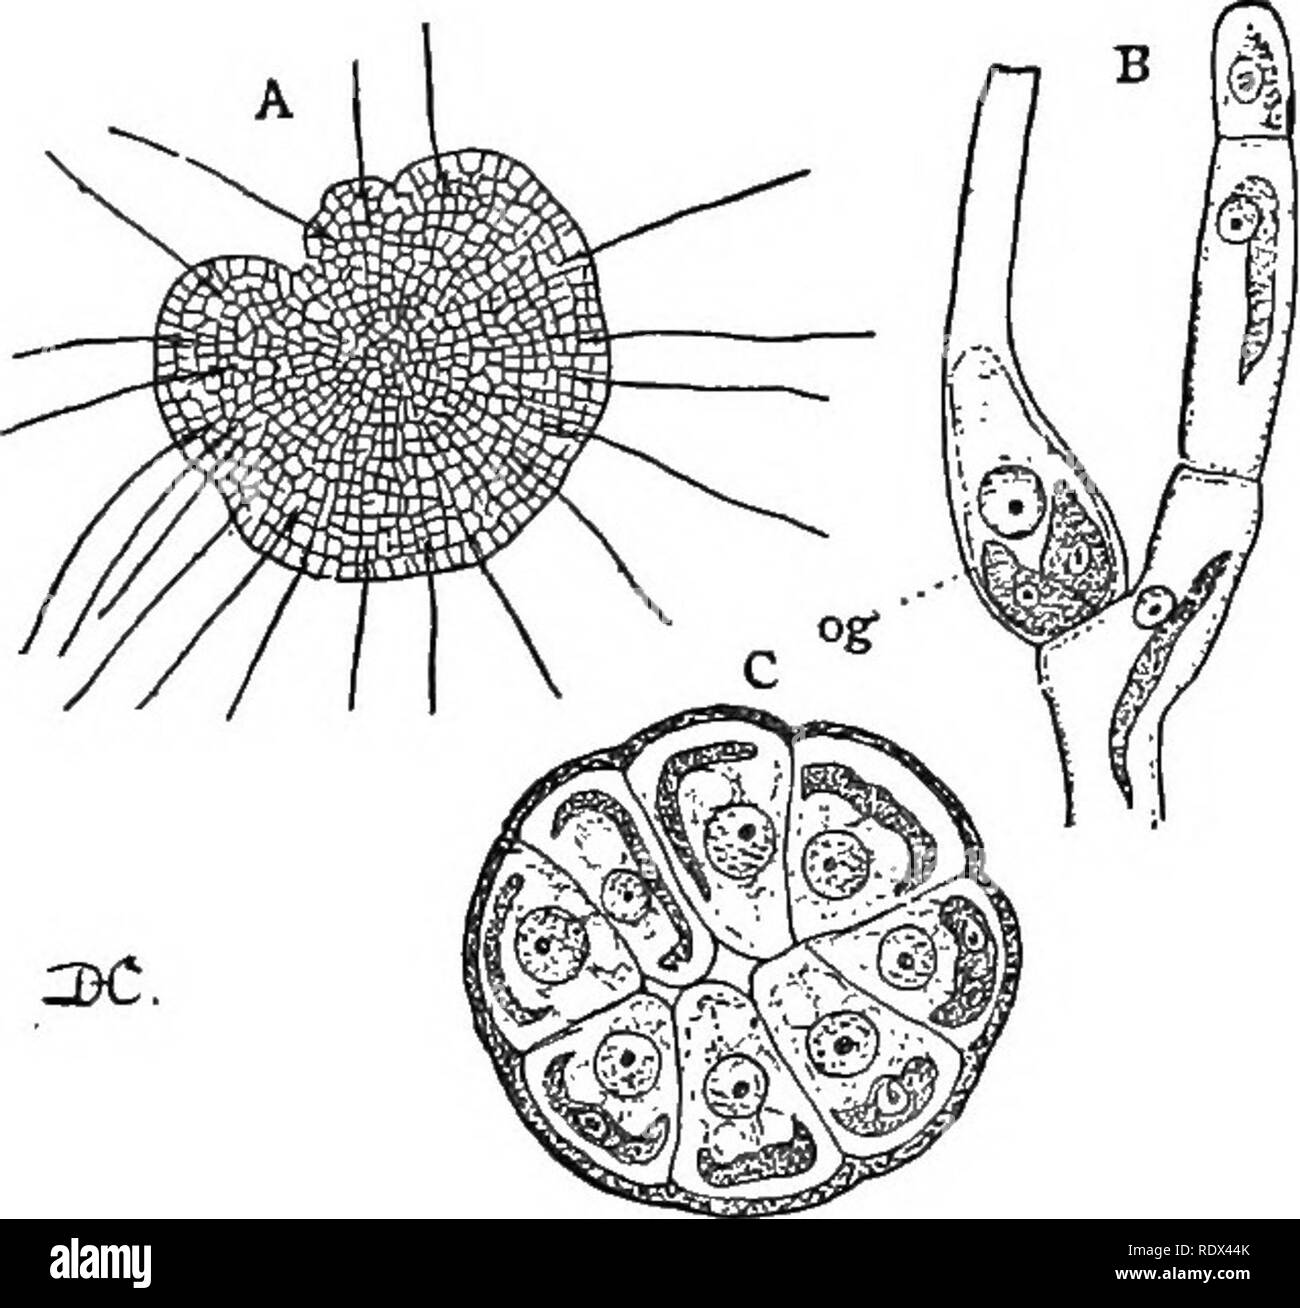 . Lectures on the evolution of plants. Botany; Plants. 54 EVOLUTION OF PLANTS 9, C, an), and closely resemble the zoospores except in size, and the partial or complete loss of chlorophyll. The spermatozoid has a large nucleus with relatively little cytoplasm, as the nucleus is probably of the most impor- tance in the act of fecundation. At maturity the oogonium opens and permits the en- trance of the motile spermatozoid, which at once pene- trates into the egg-cell where its nucleus fuses with that of the egg, thus fertilizing it. As the result of fertilization the egg becomes in- vested with  Stock Photo